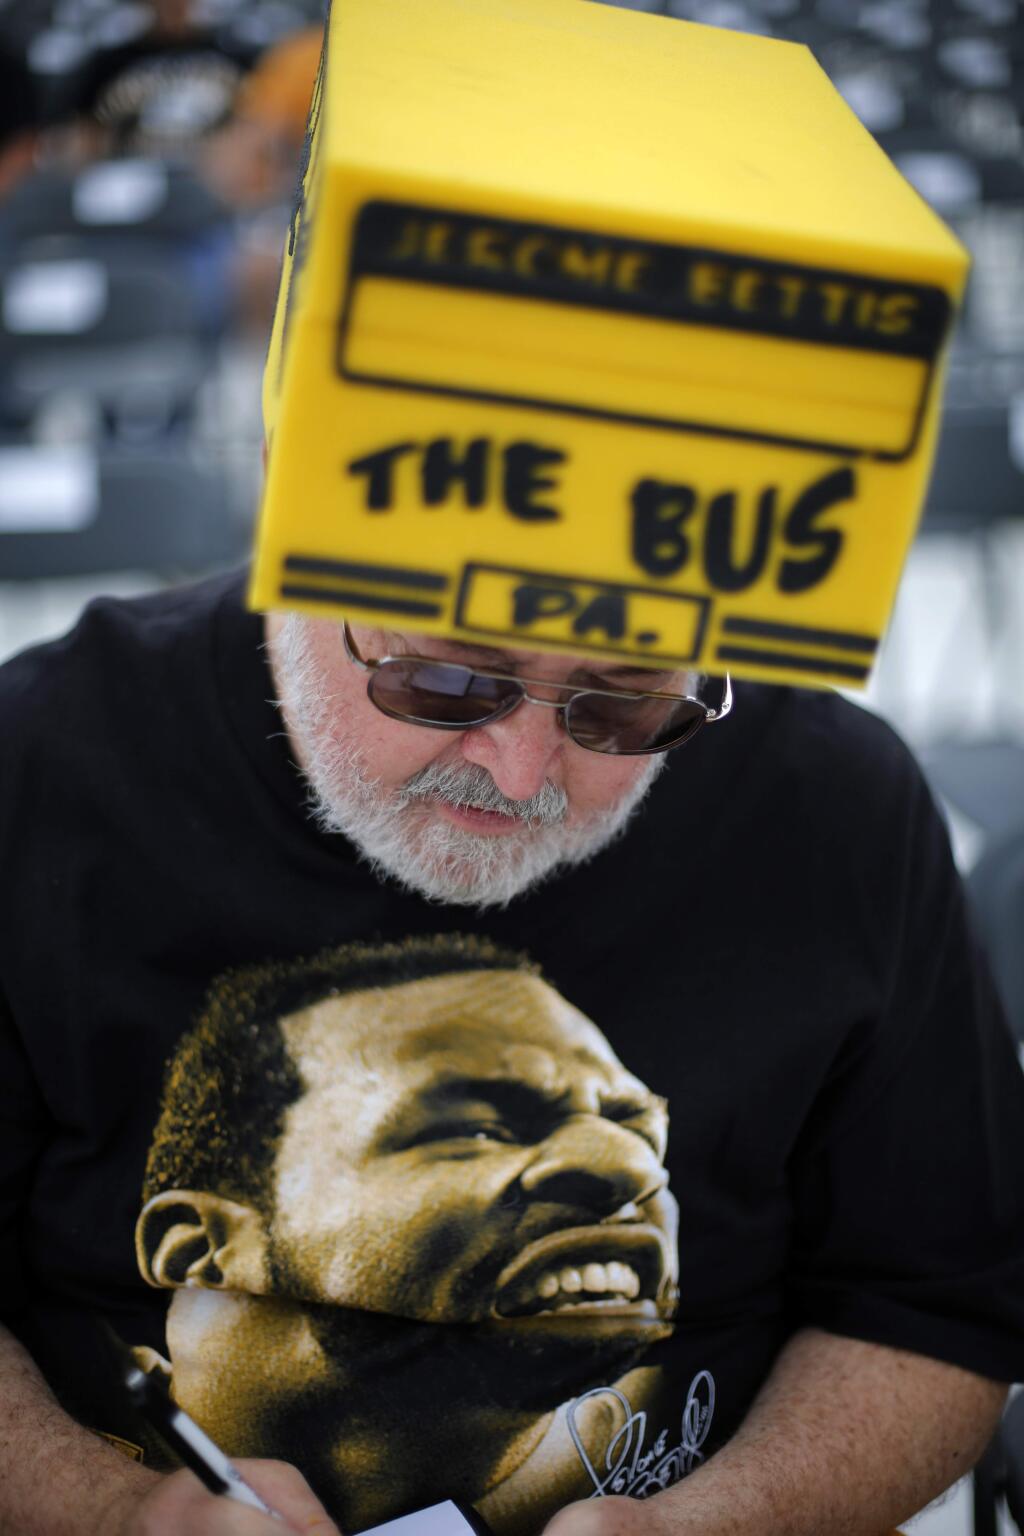 Jerome Bettis fan Marty Higbee, of Cincinnati, wears a foam Bus as he waits for the induction into the Pro Football Hall of Fame of Pittsburgh Steelers running back Jerome Bettis at Tom Benson Hall of Fame Stadium, Saturday, Aug. 8, 2015, in Canton, Ohio. (AP Photo/Gene J. Puskar)